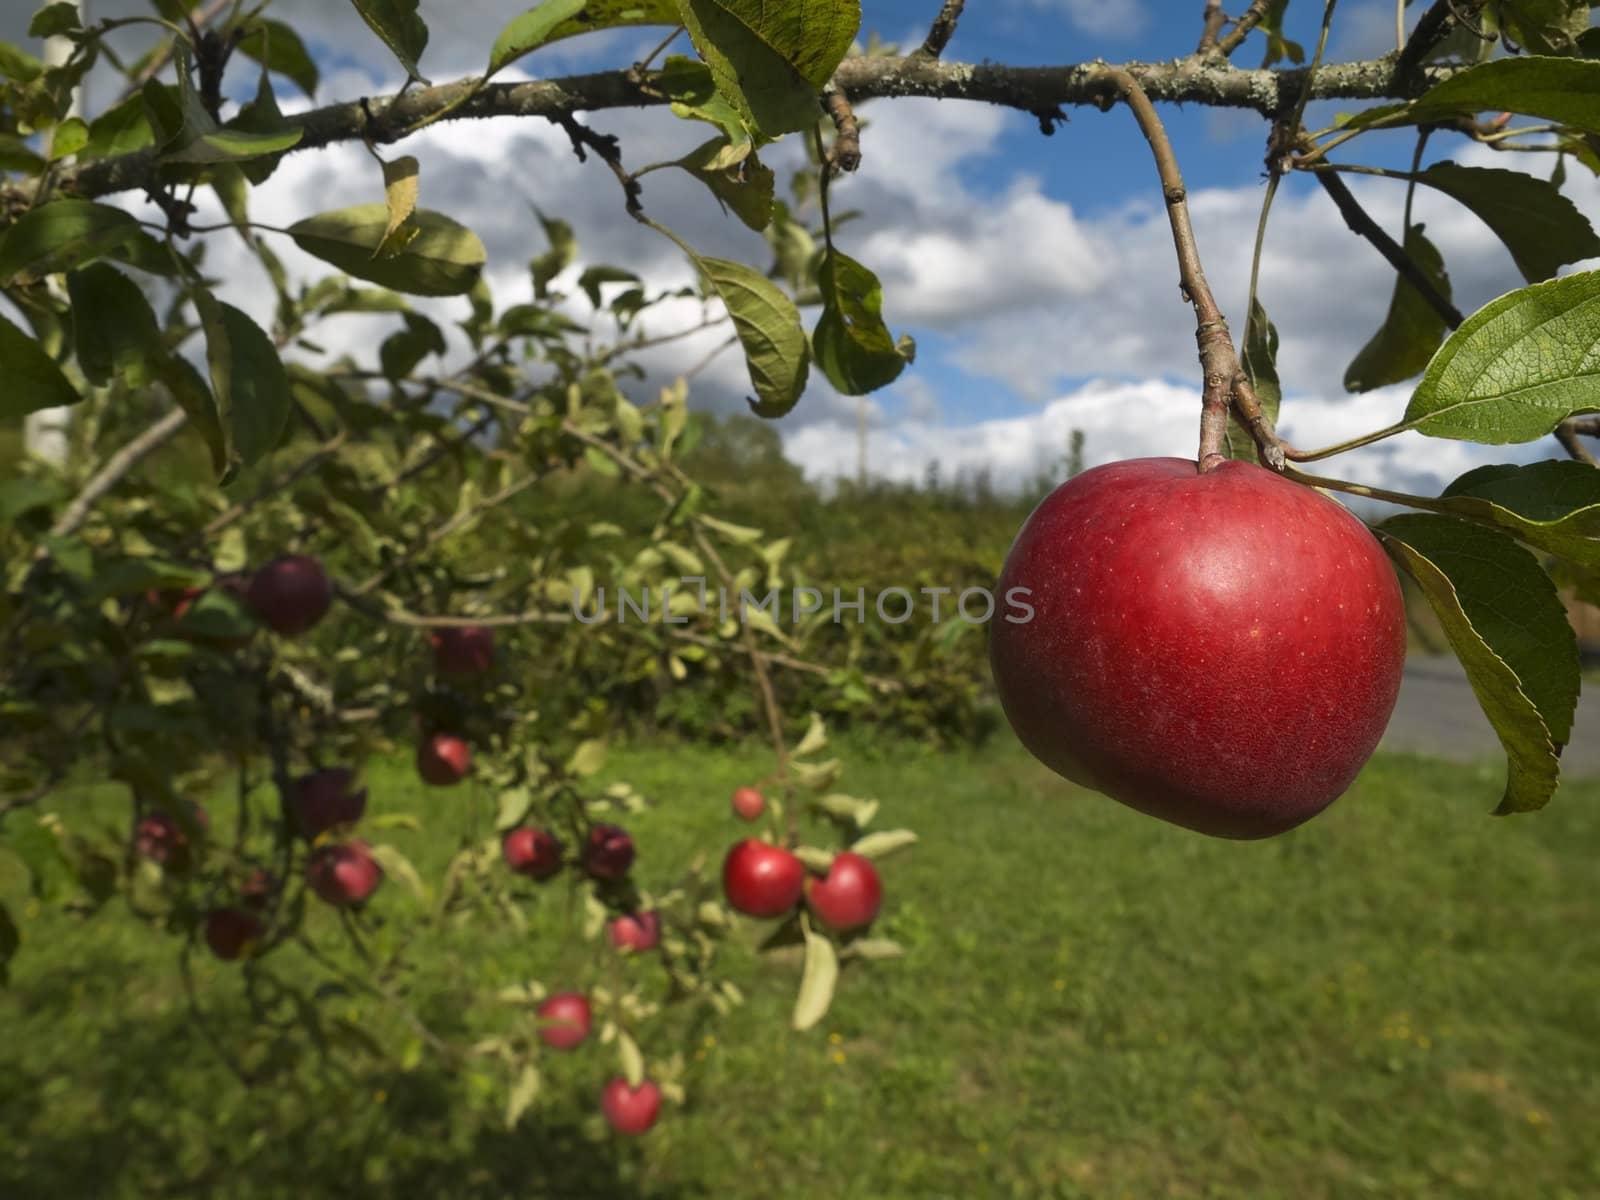 Several red apples hanging on the tree. Focus on the foreground.